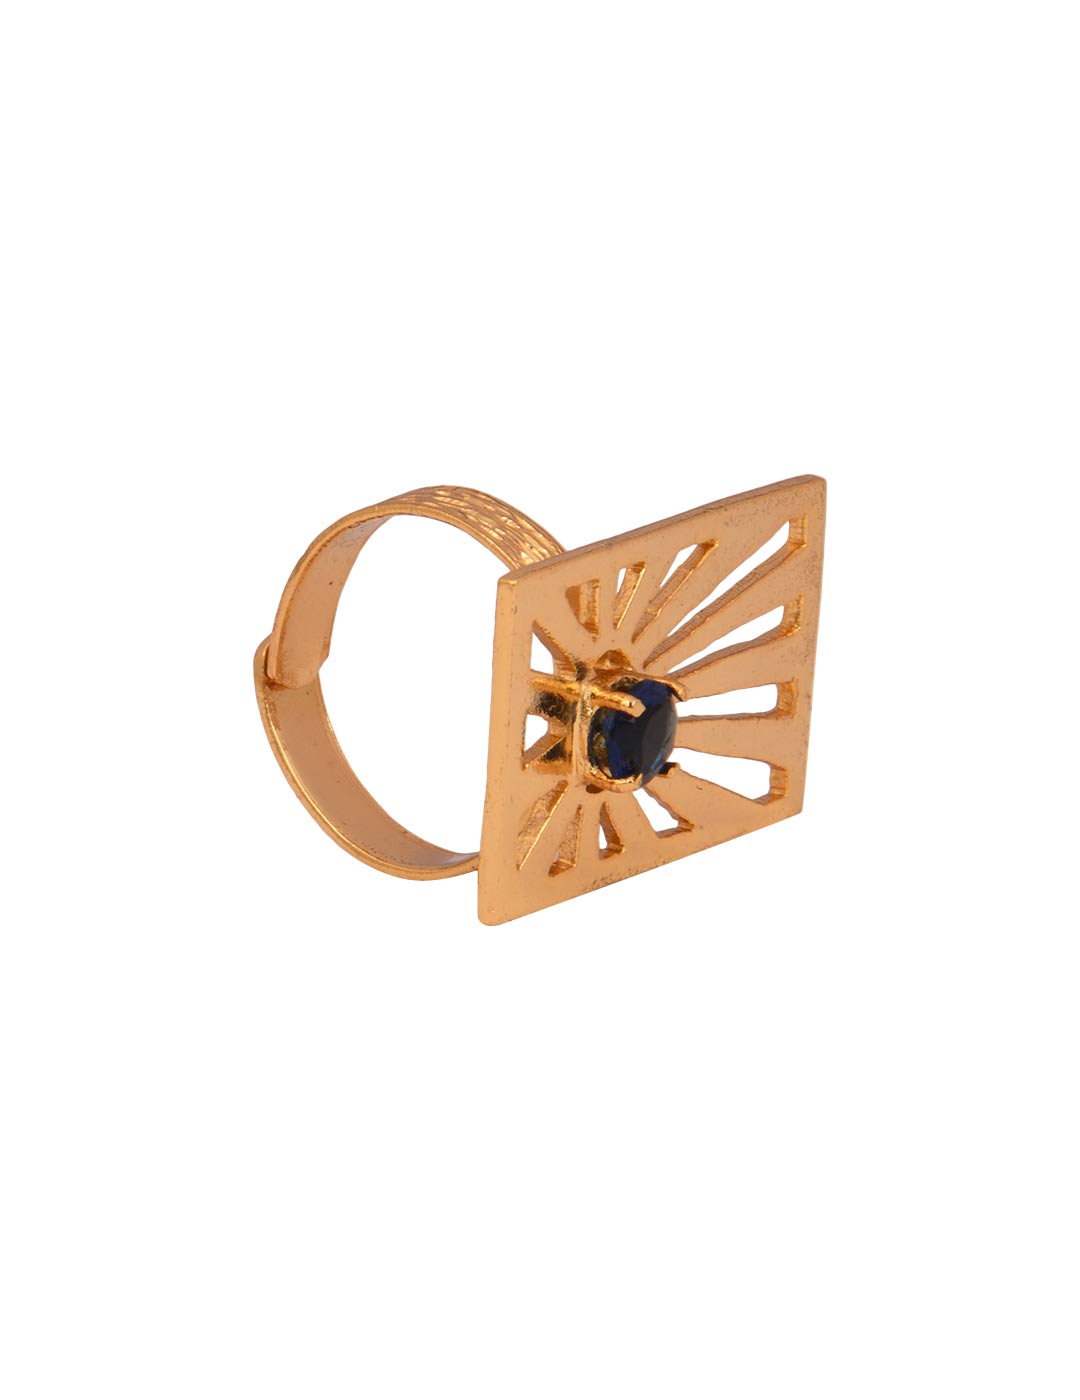 Nazar Ring | Handmade | 24K Gold Plated | Made in India